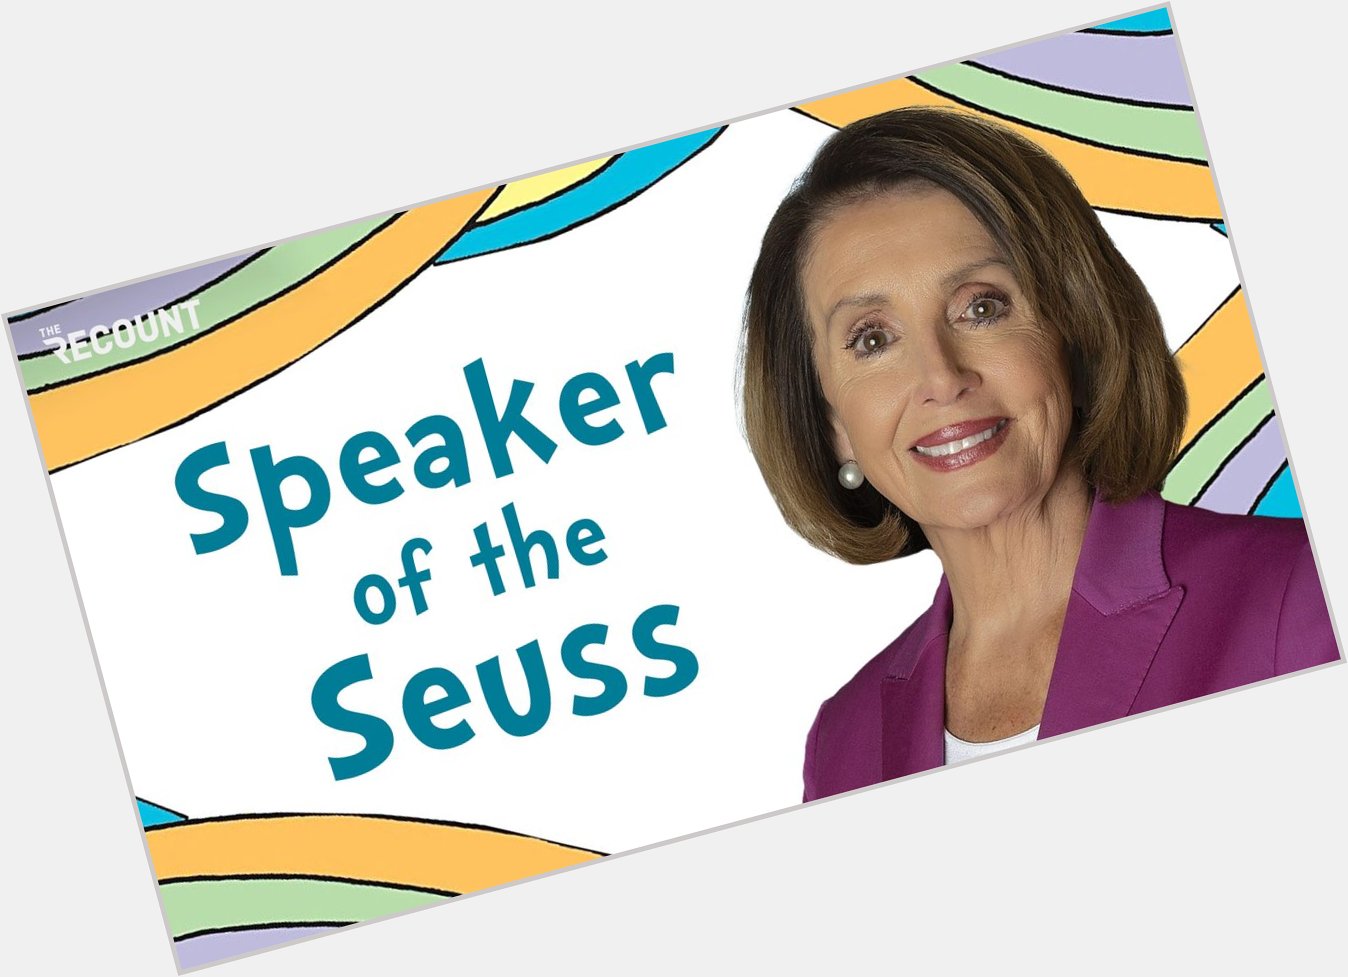 Wishing a very happy birthday to from your biggest fan, Nancy Pelosi. 